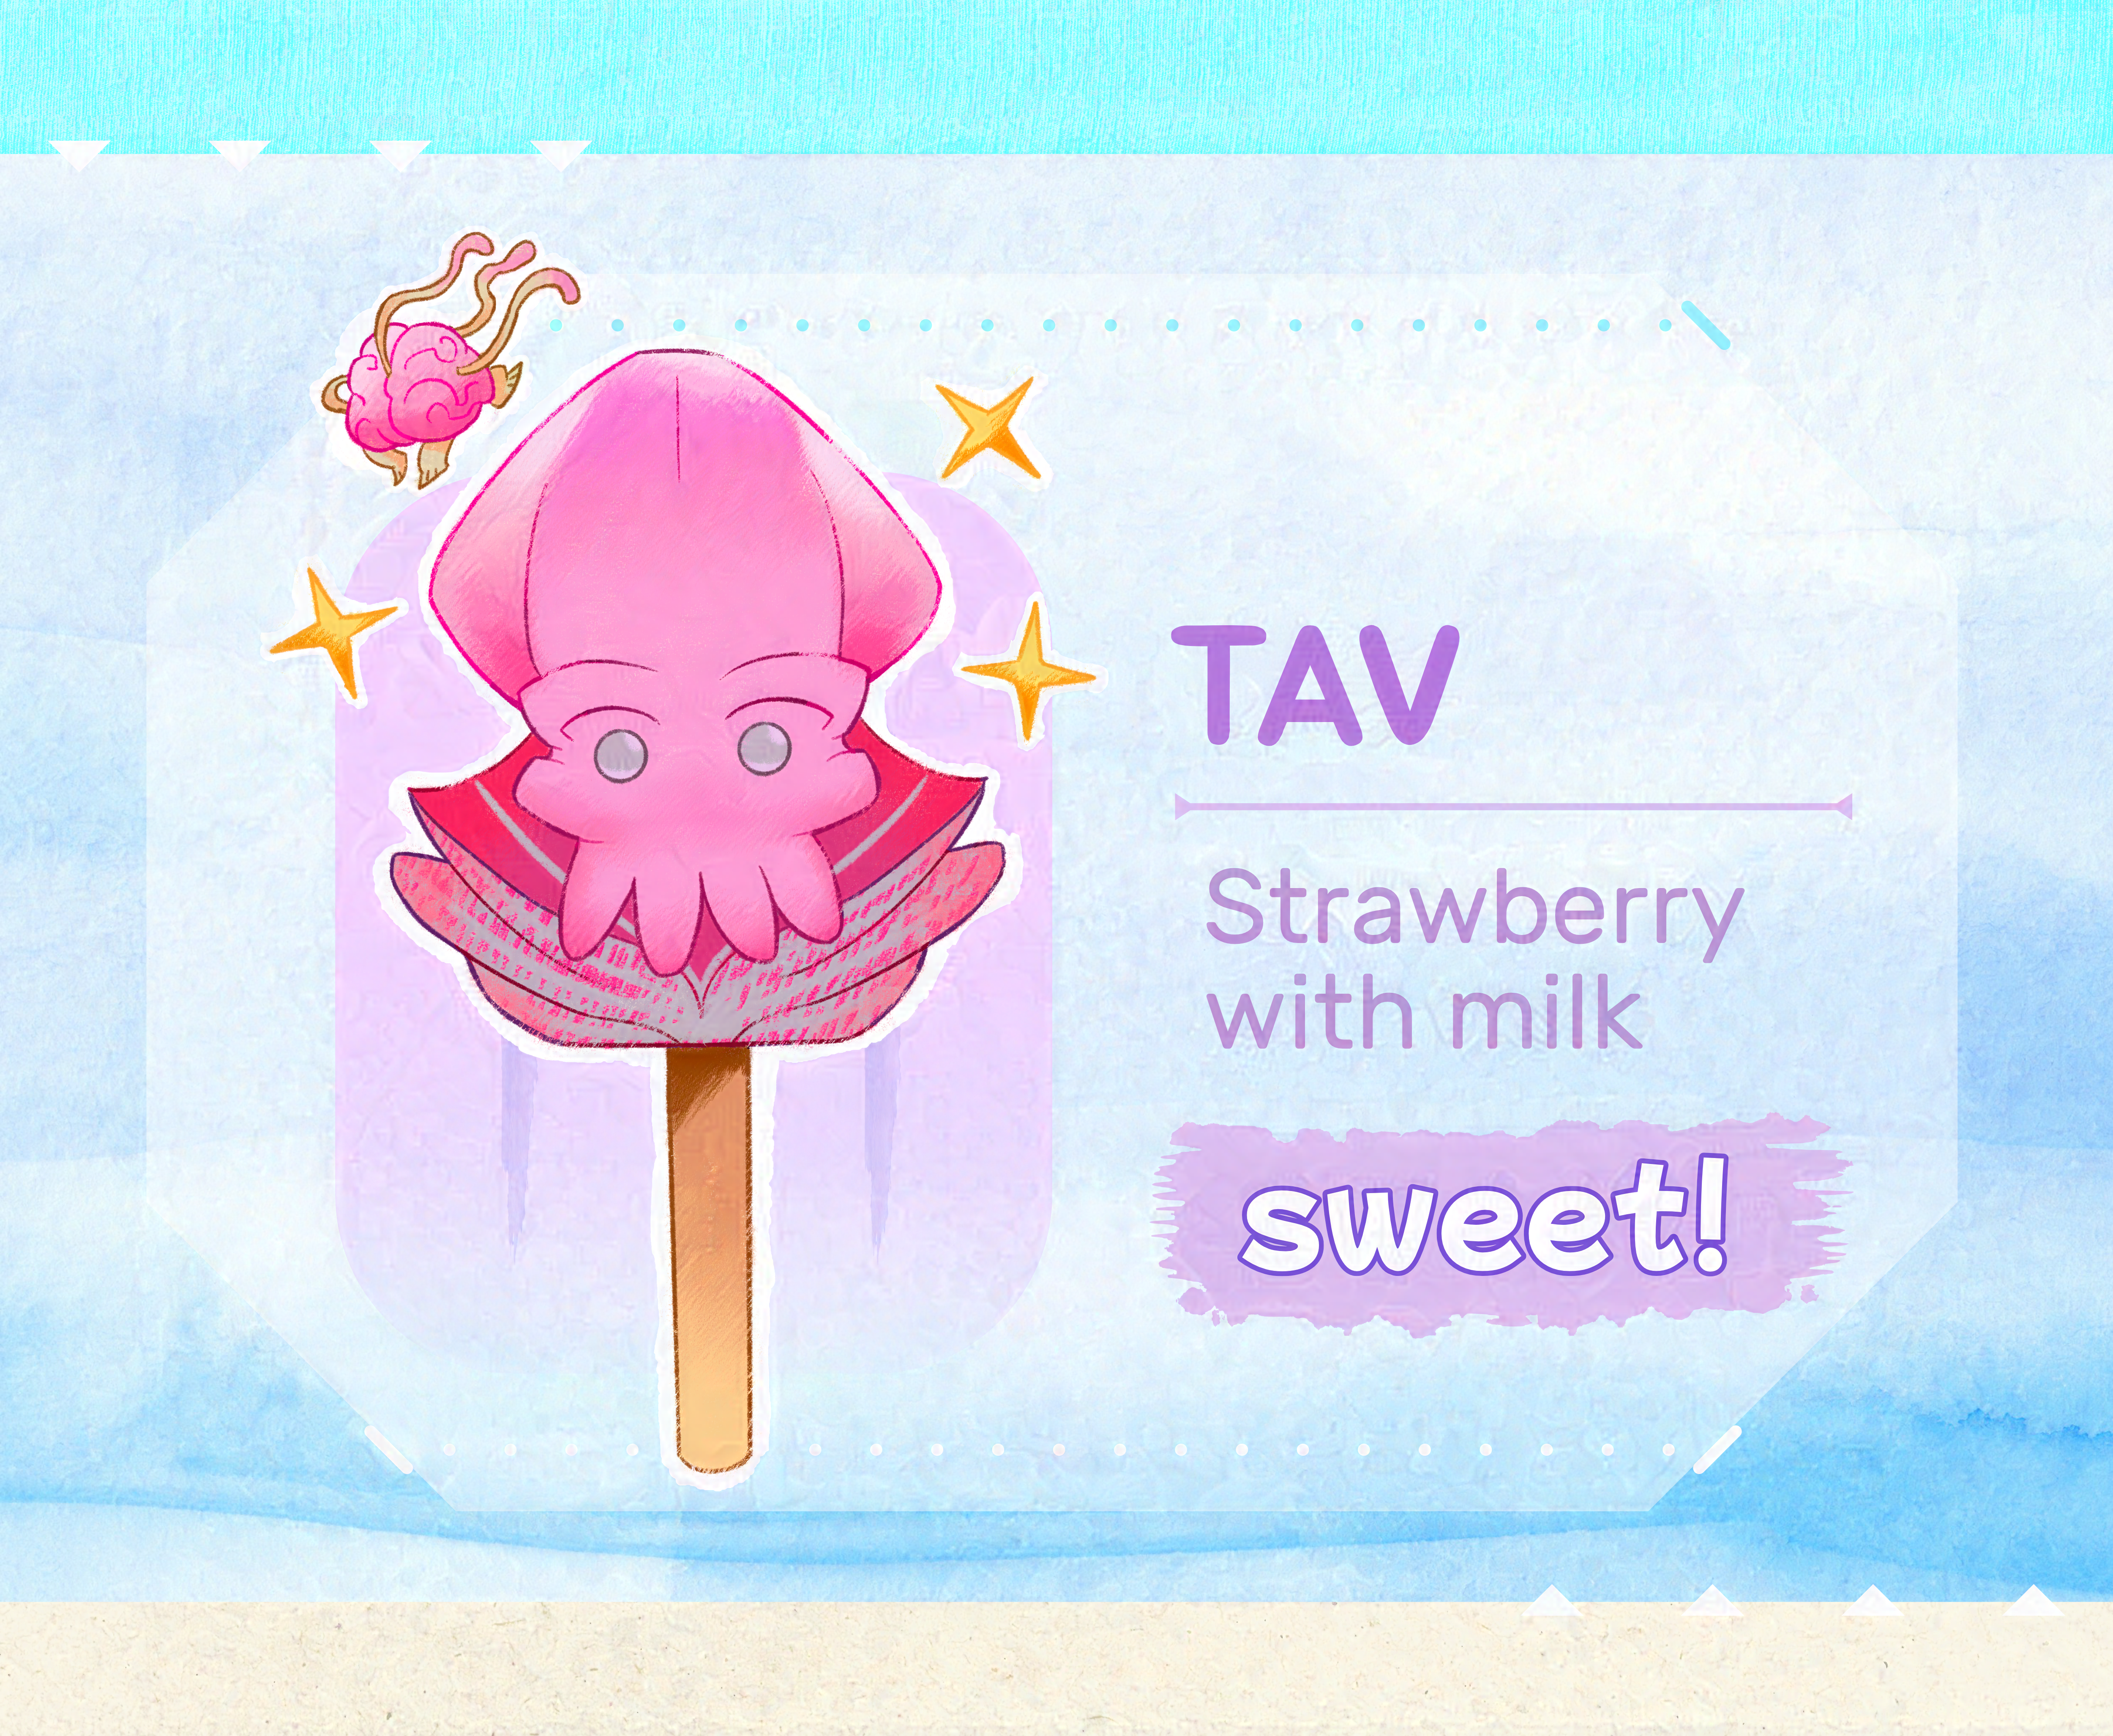 A close-up of the pink Tav popsicle. They're surrounded by an intellect devourer (Us), and sparkling star shapes. On their right are the words: 'Tav - strawberry with milk. Sweet!'